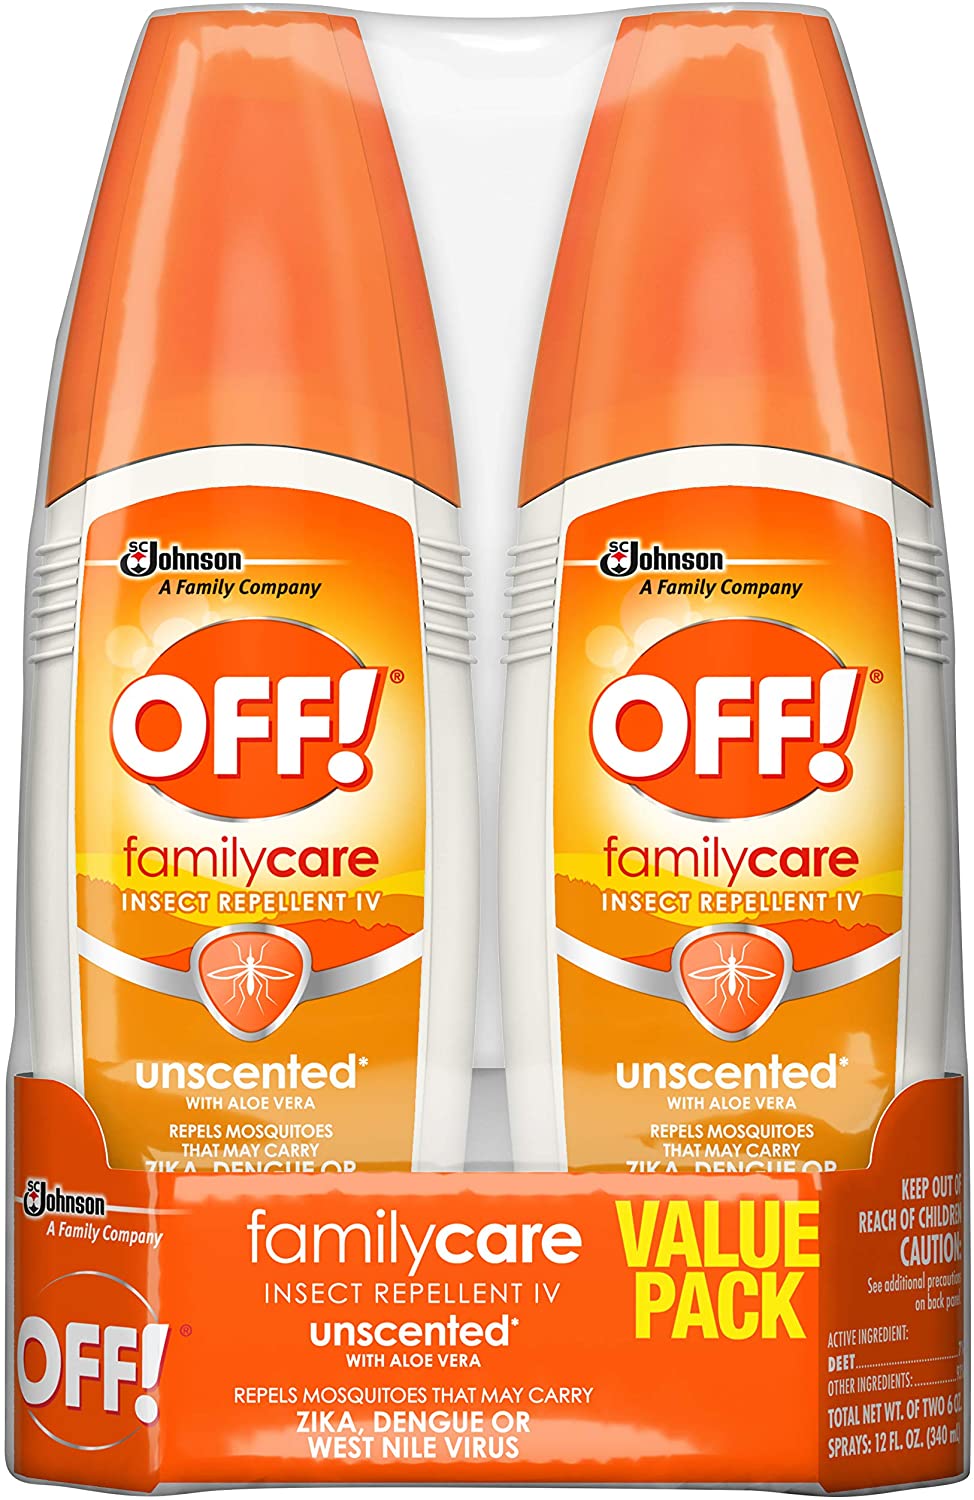 OFF! FamilyCare Fragrance Free Insect Repellent IV, 2-Pack